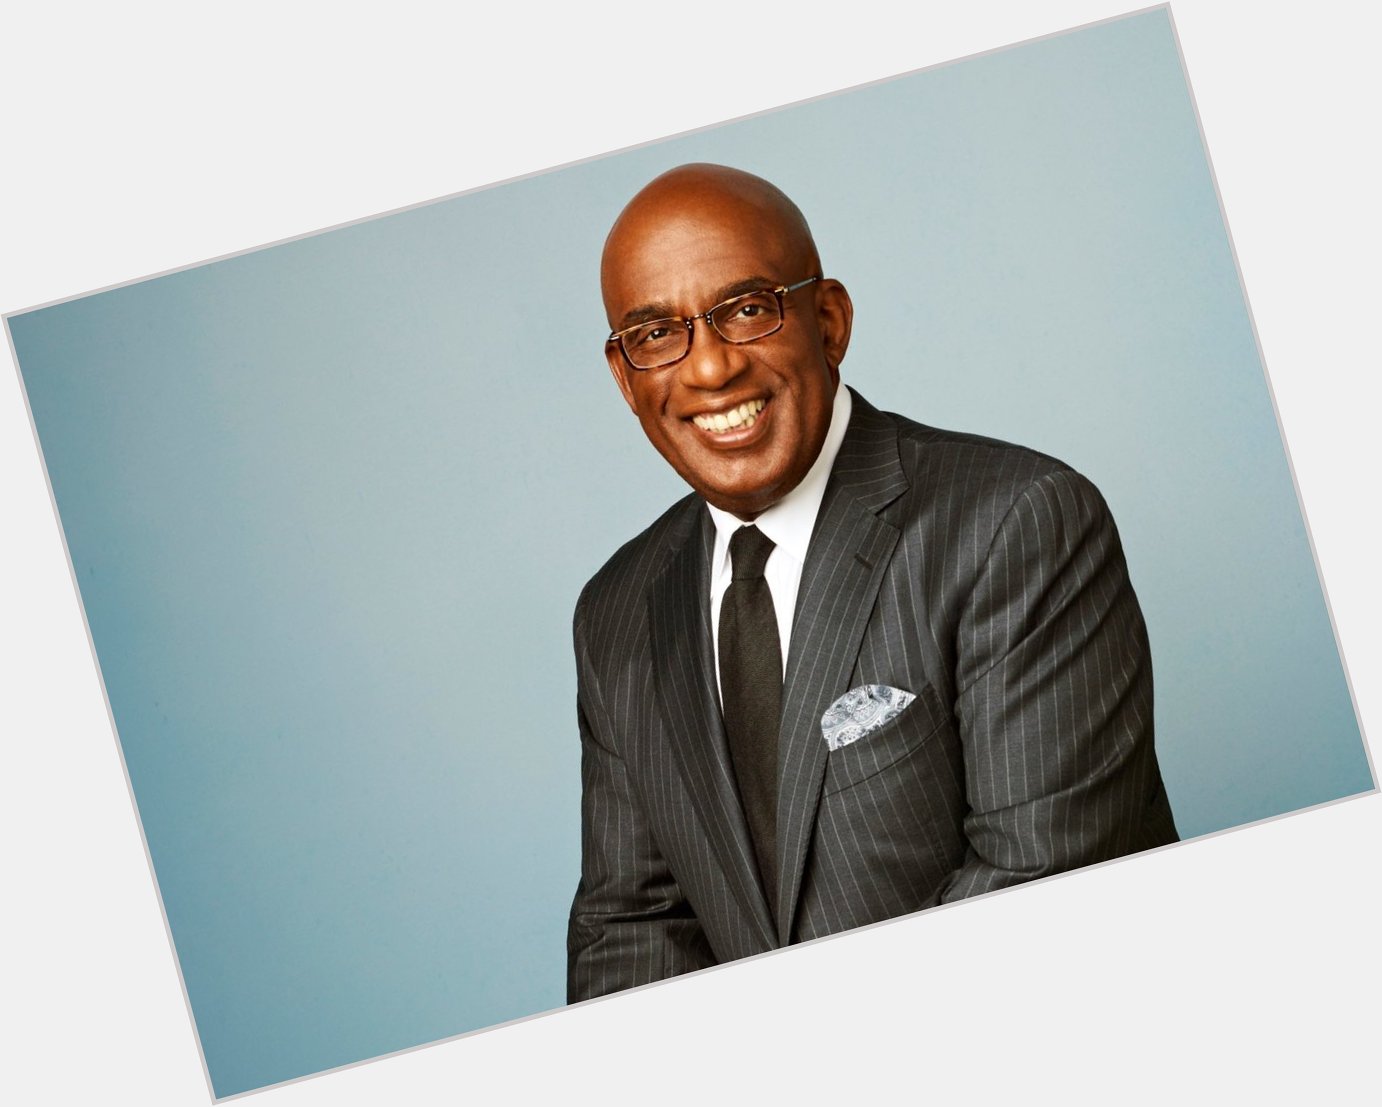 Happy Belated Birthday to the one and only Al Roker! 